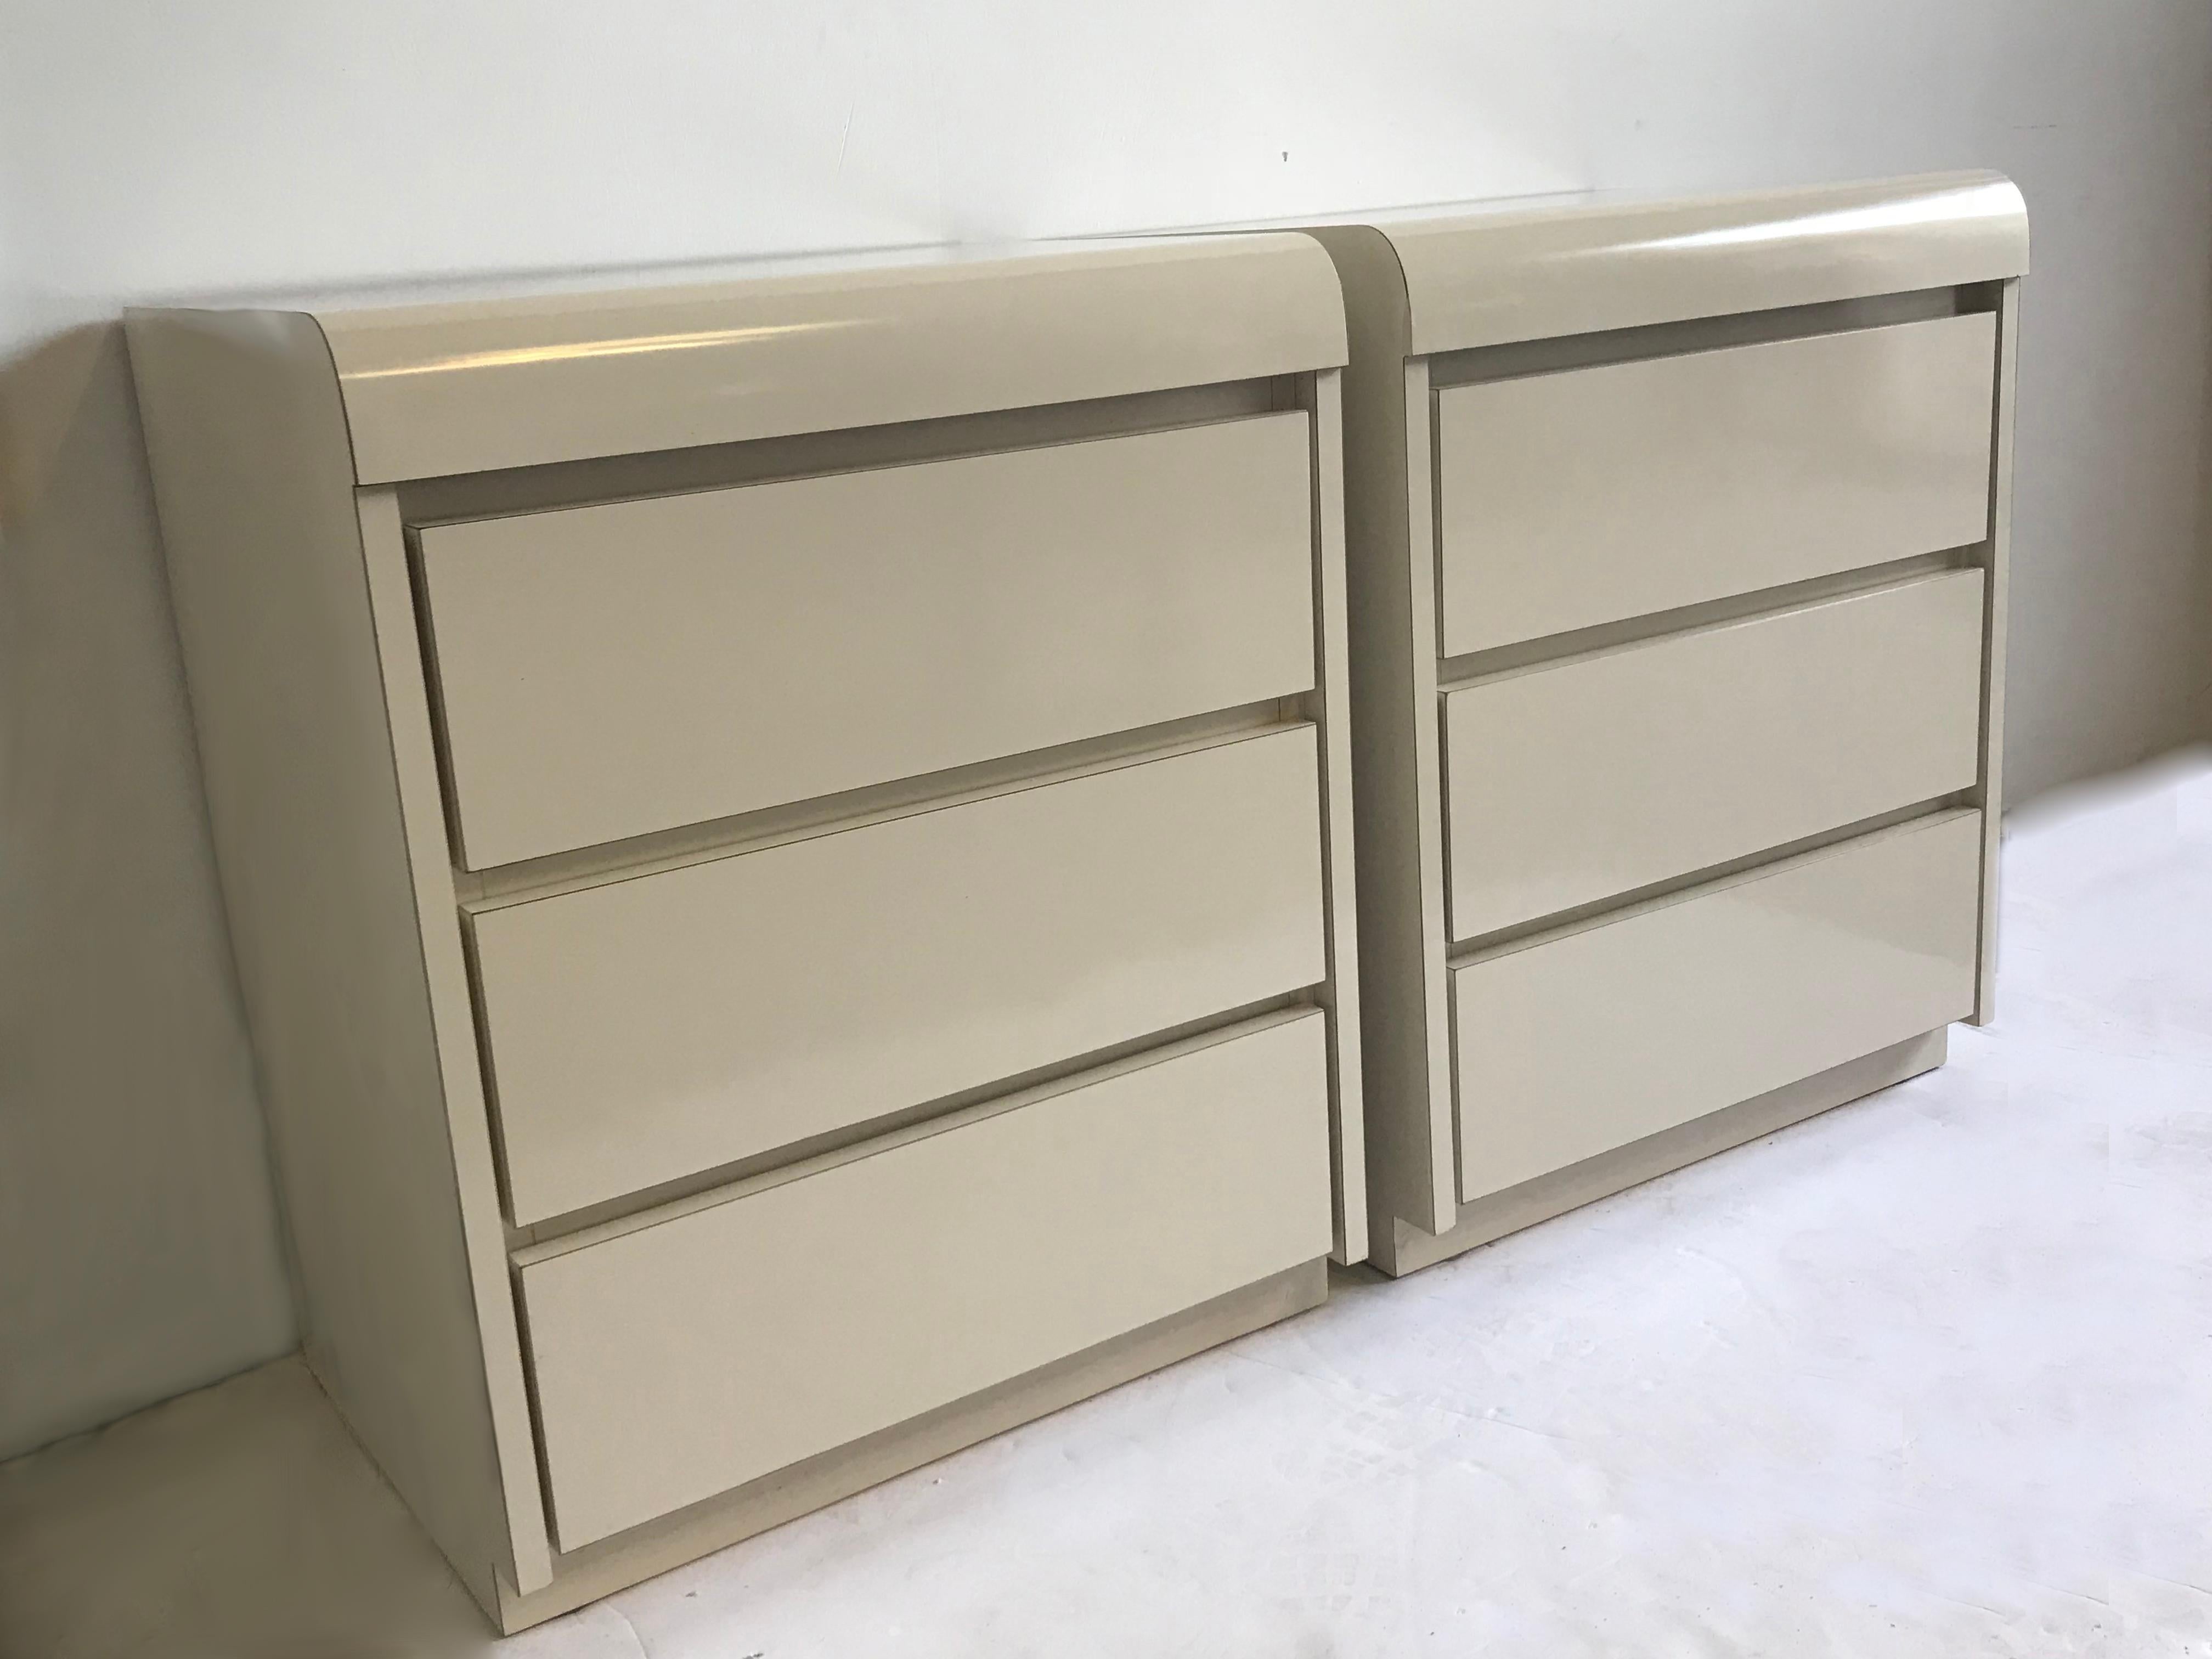 A pair of off-white lacquer laminate formica nightstands.
These glossy stands have 3 drawers and a curved front edge.